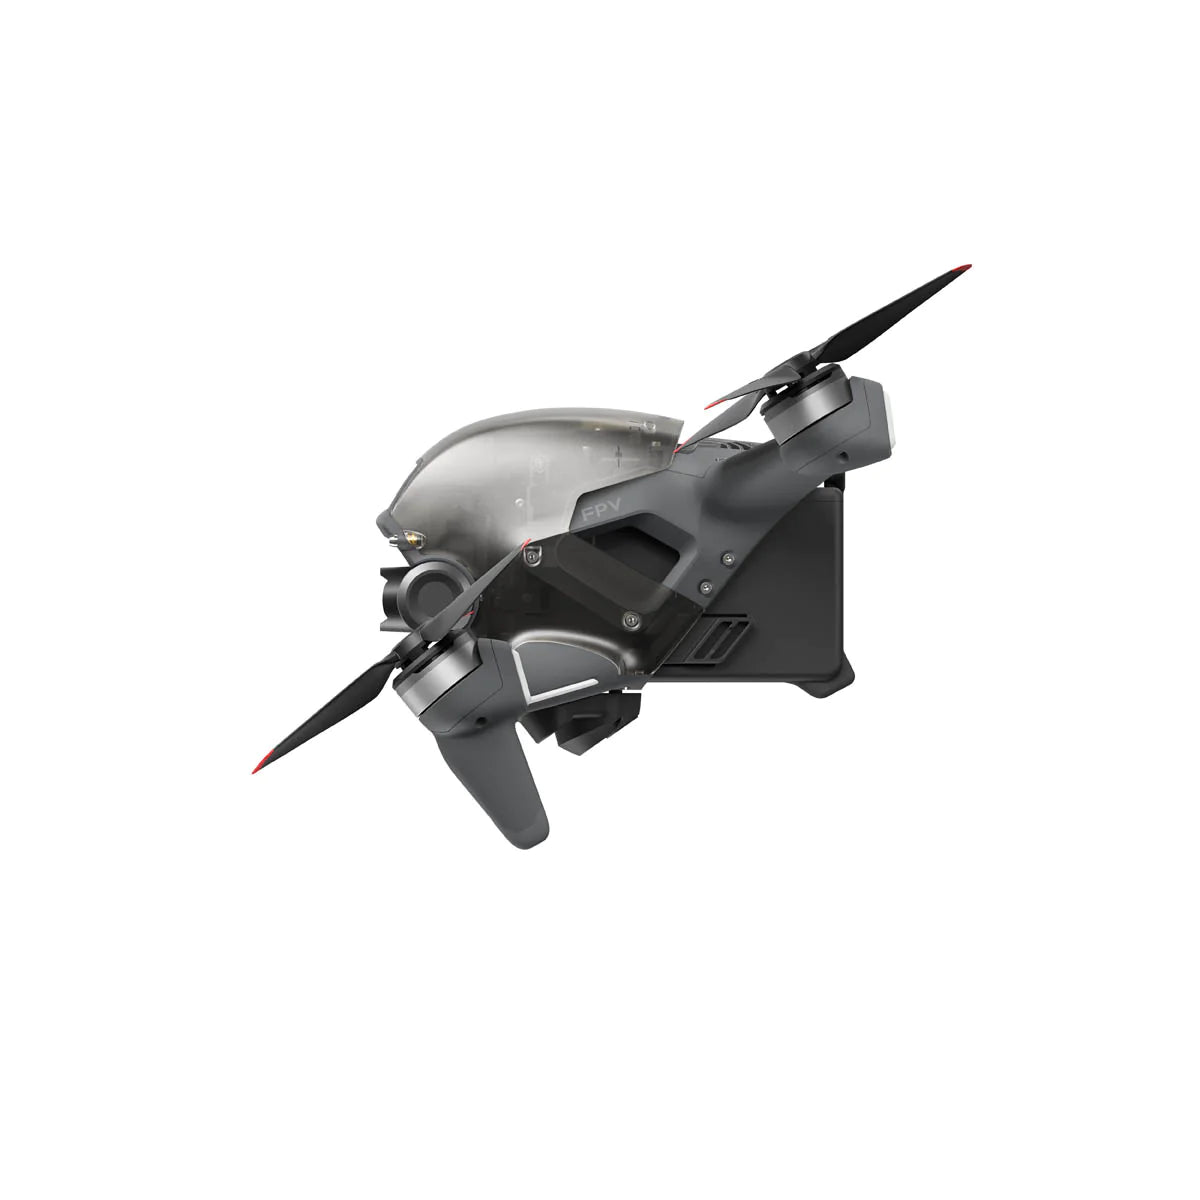 DJI Avata Fly Smart Explorer Combo with Goggles Integra and RC Motion 2  Controller- First-Person View Drone UAV with 4K Video, Built-in Propeller